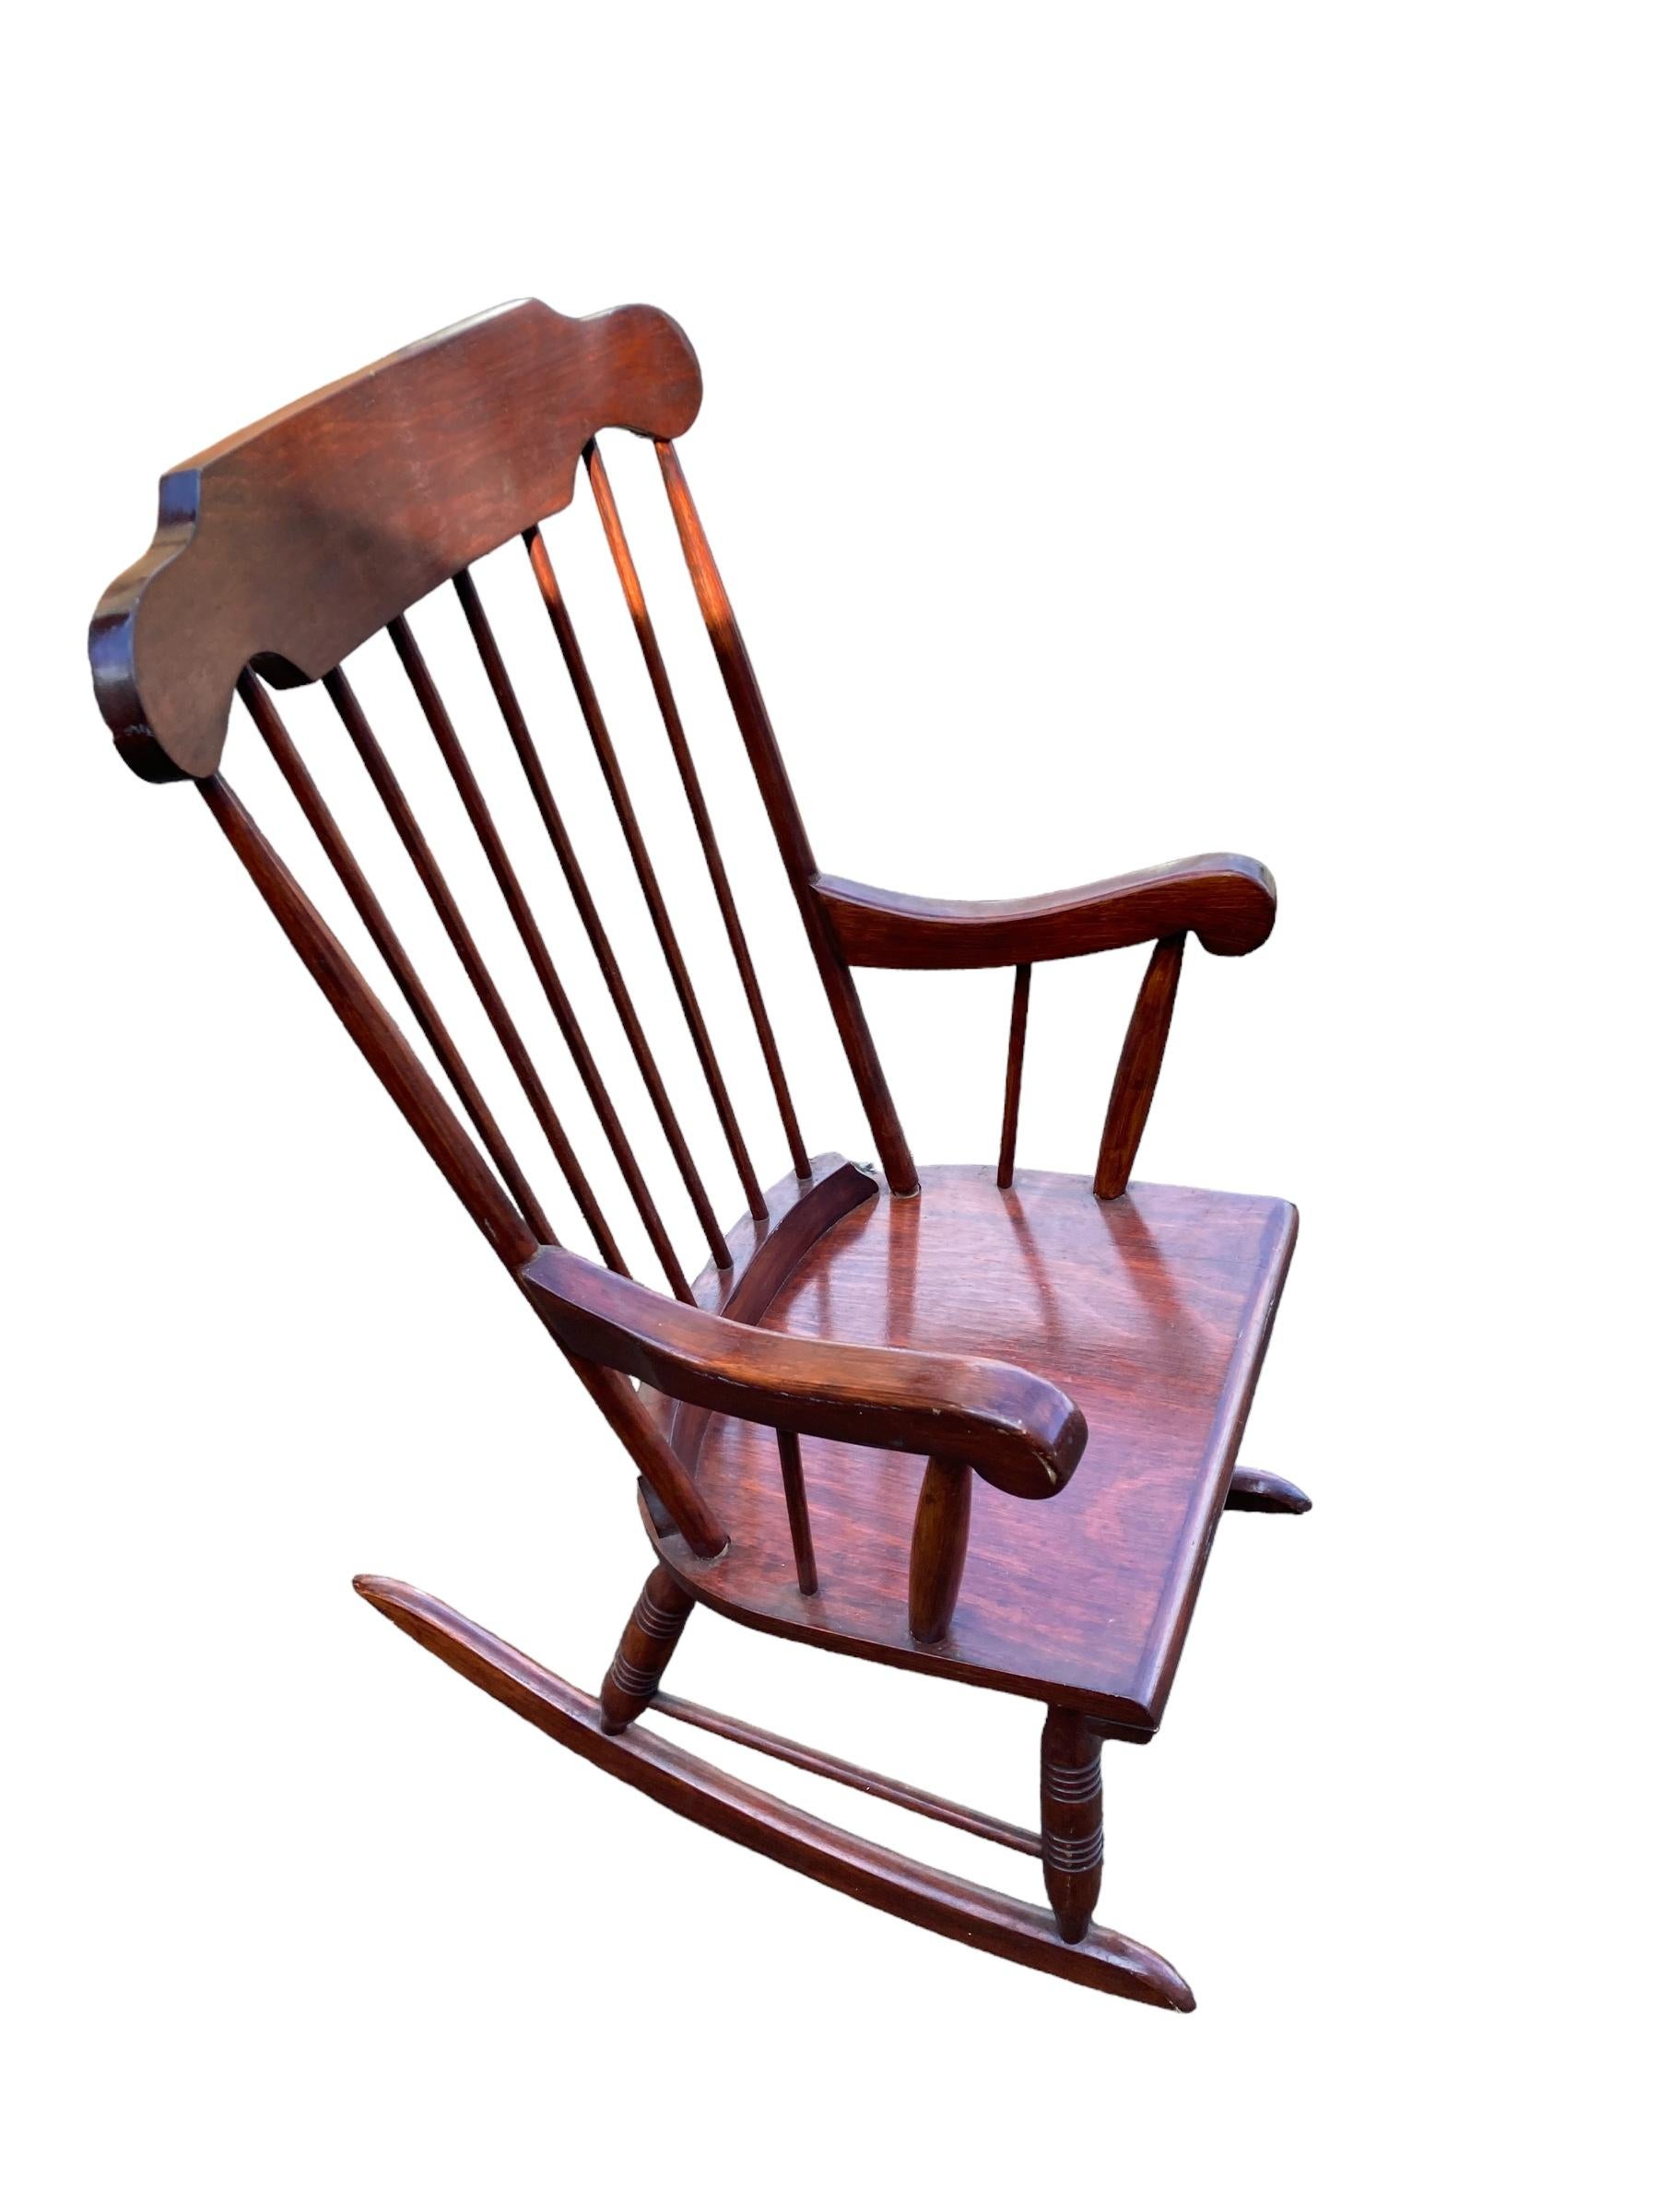 Windsor style rocking chair dating from around 1950's in Mahogany good and sturdy condition
H: 101cm
W: 60cm
D: 43 cm
SH: 43cm
Rocker Depth: 75cm